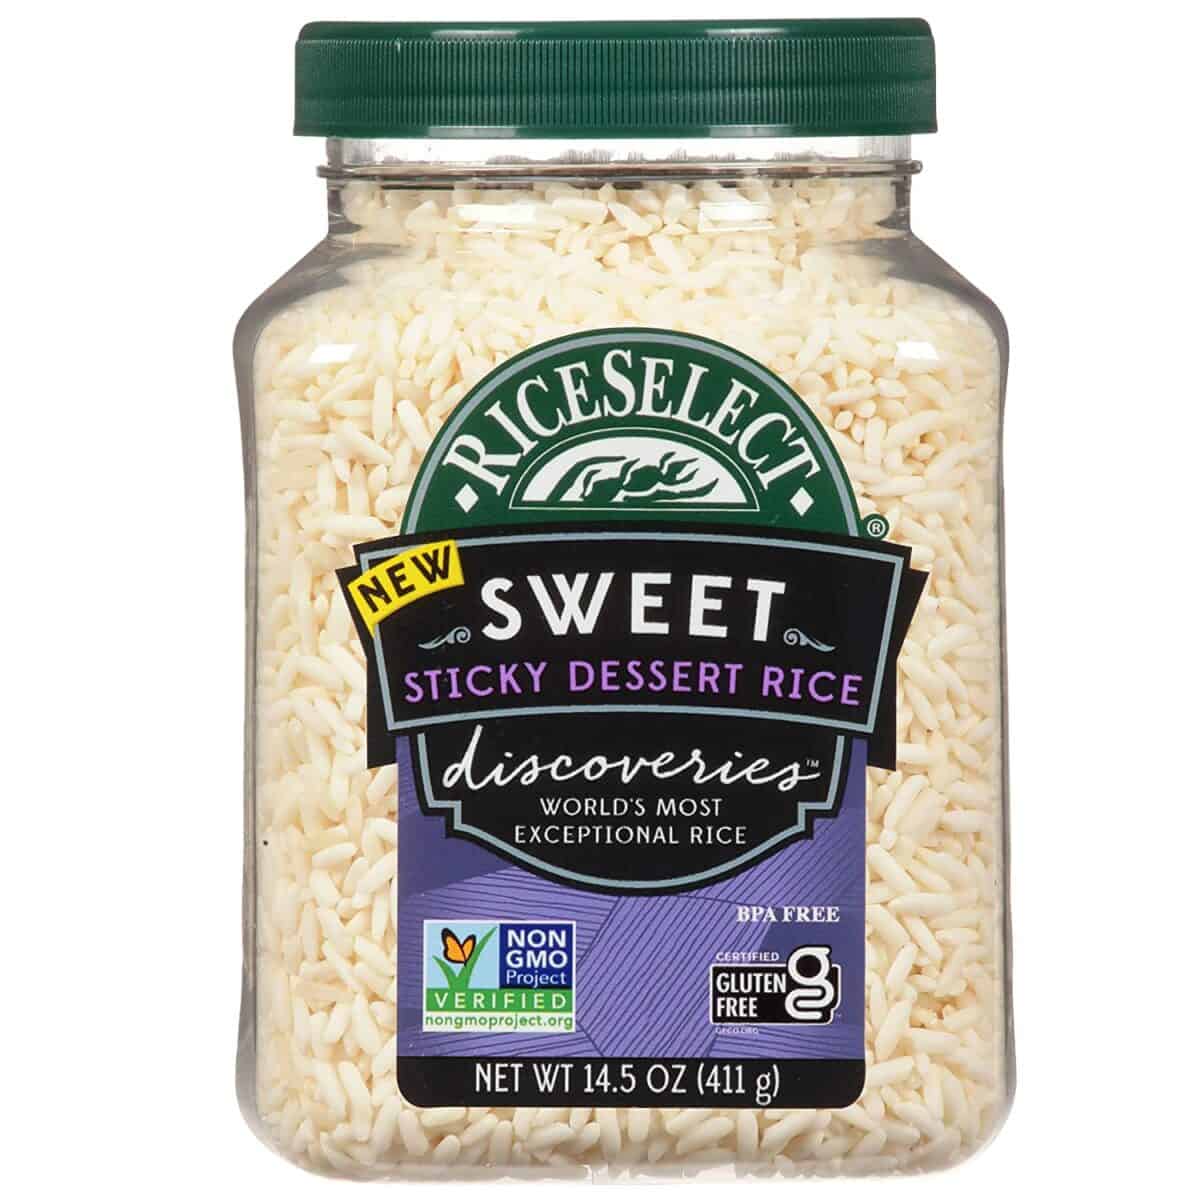 Best non-GMO sticky rice- RiceSelect Sweet Sticky Rice